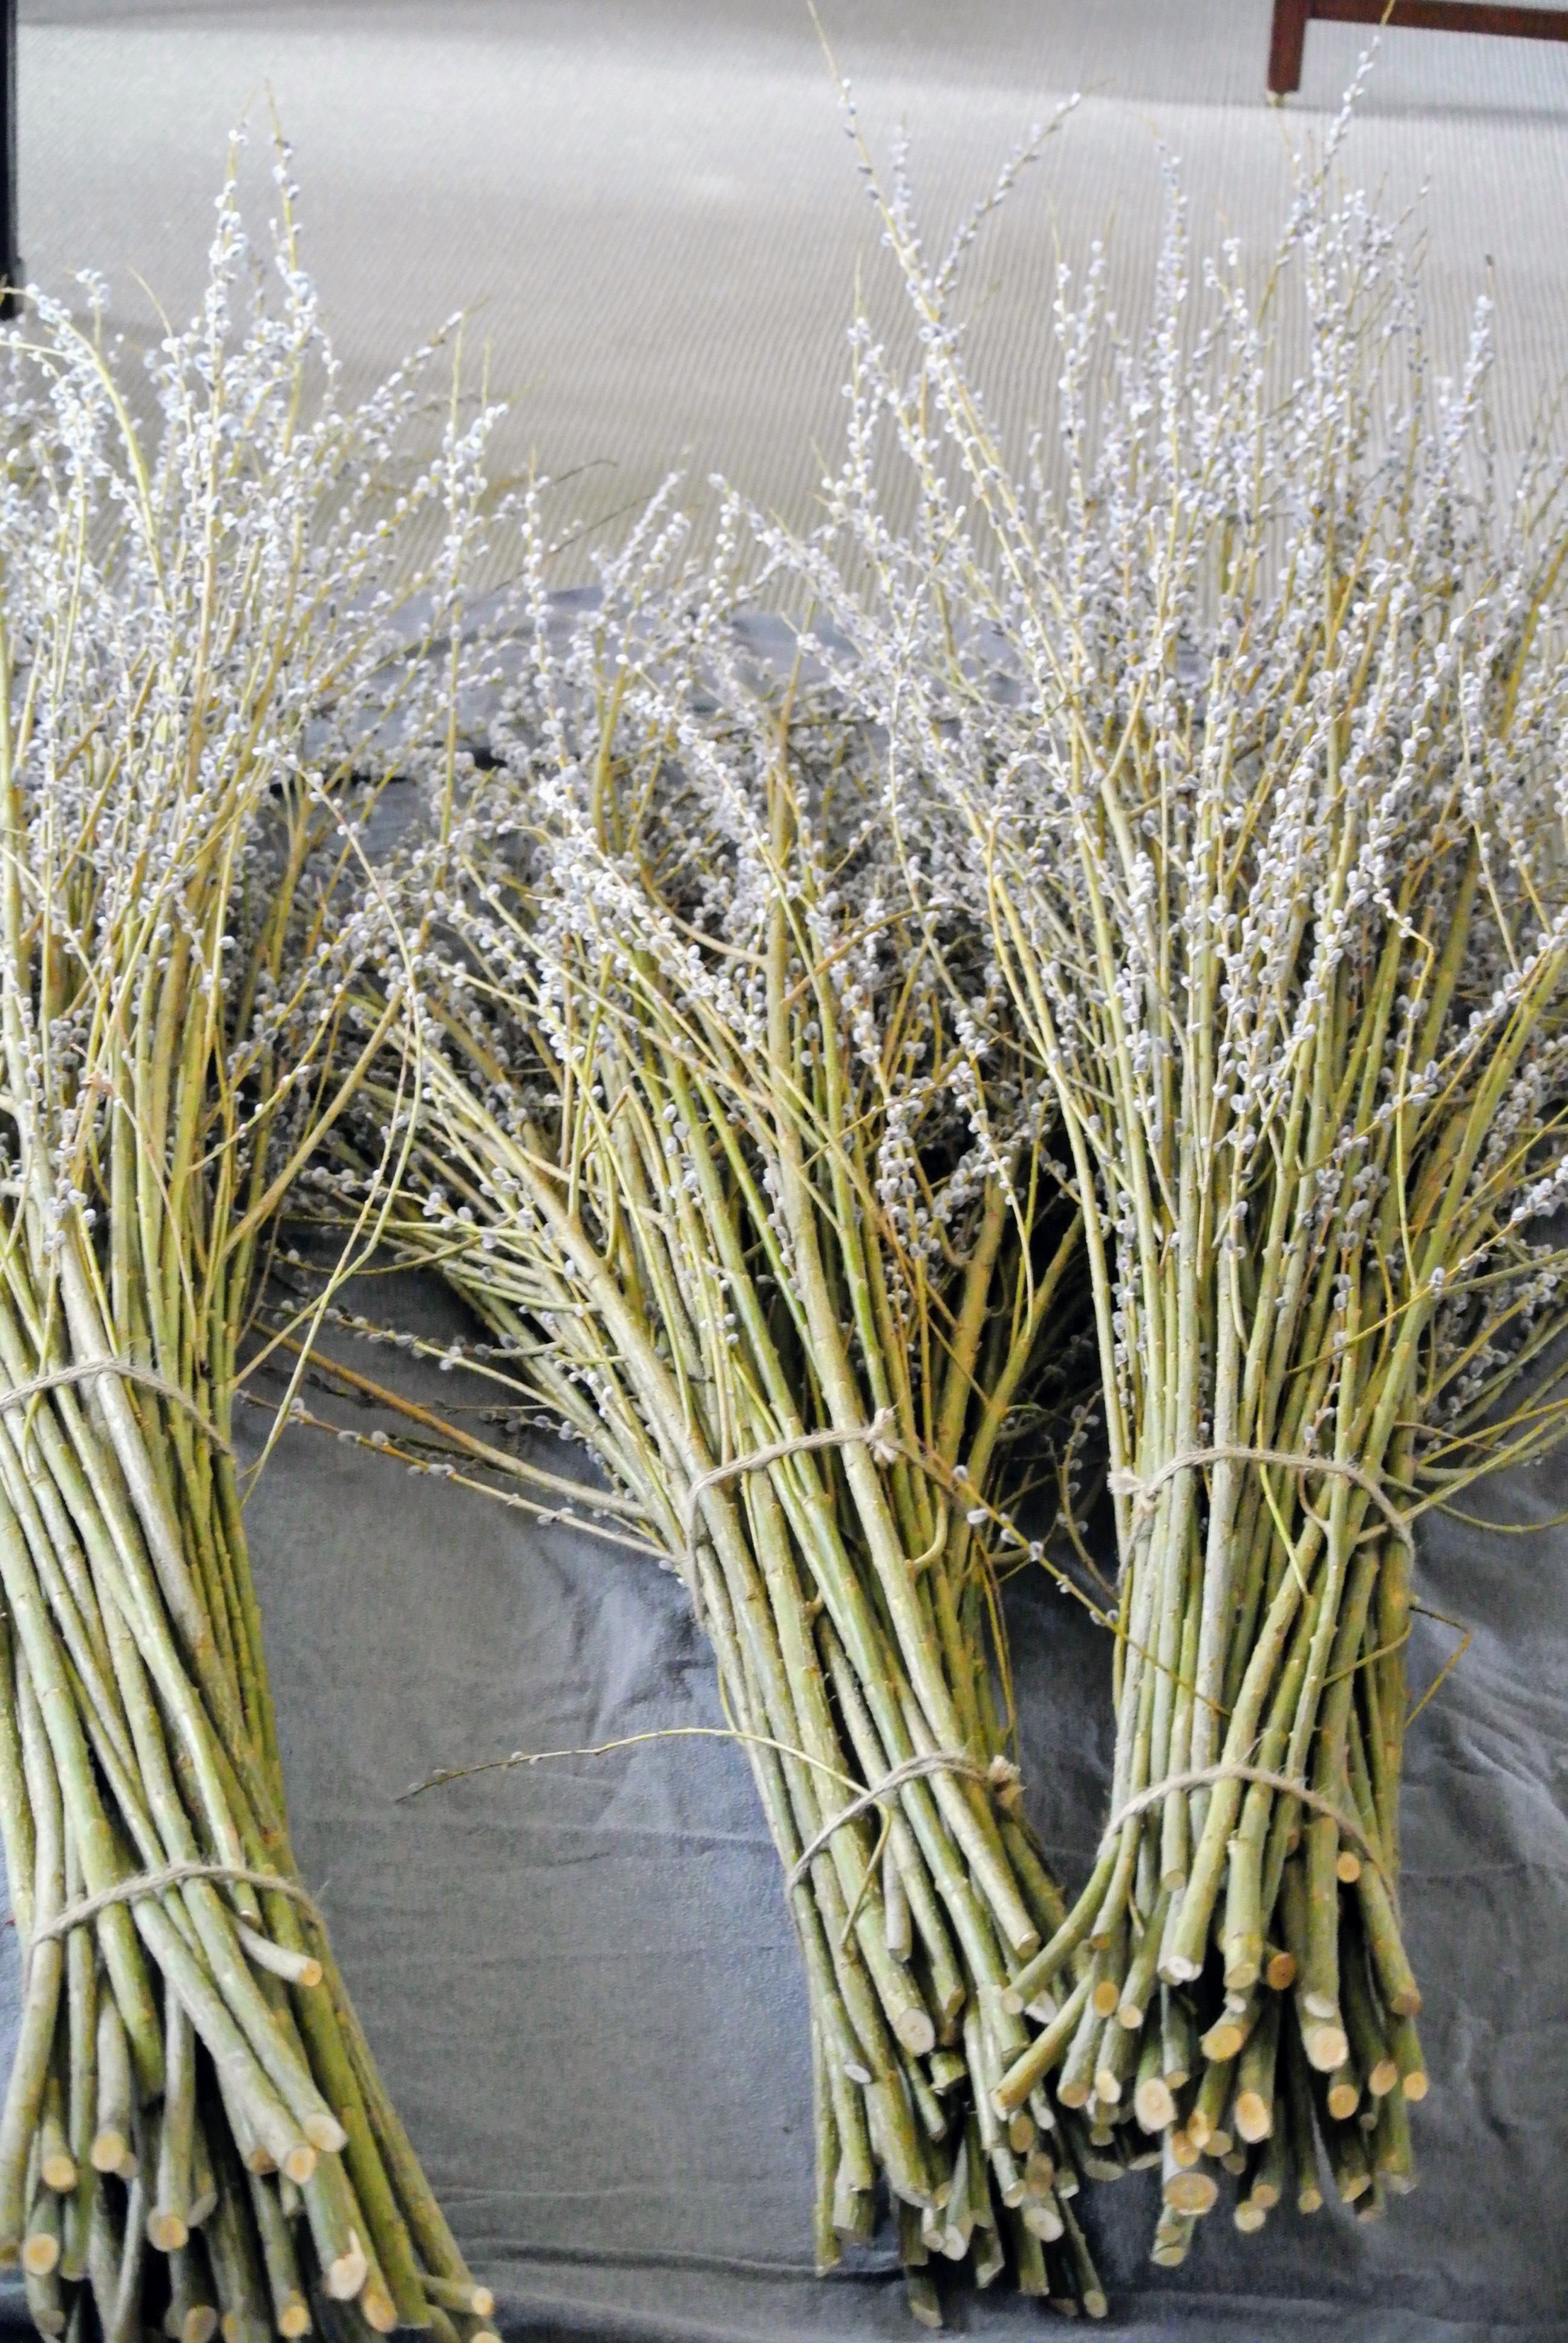 Living Vase Decor - Live and Growing Willow Branches - No Vase Included - They Grow in Water for Weeks - Table Decor, Wedding Decor (25 Branches)